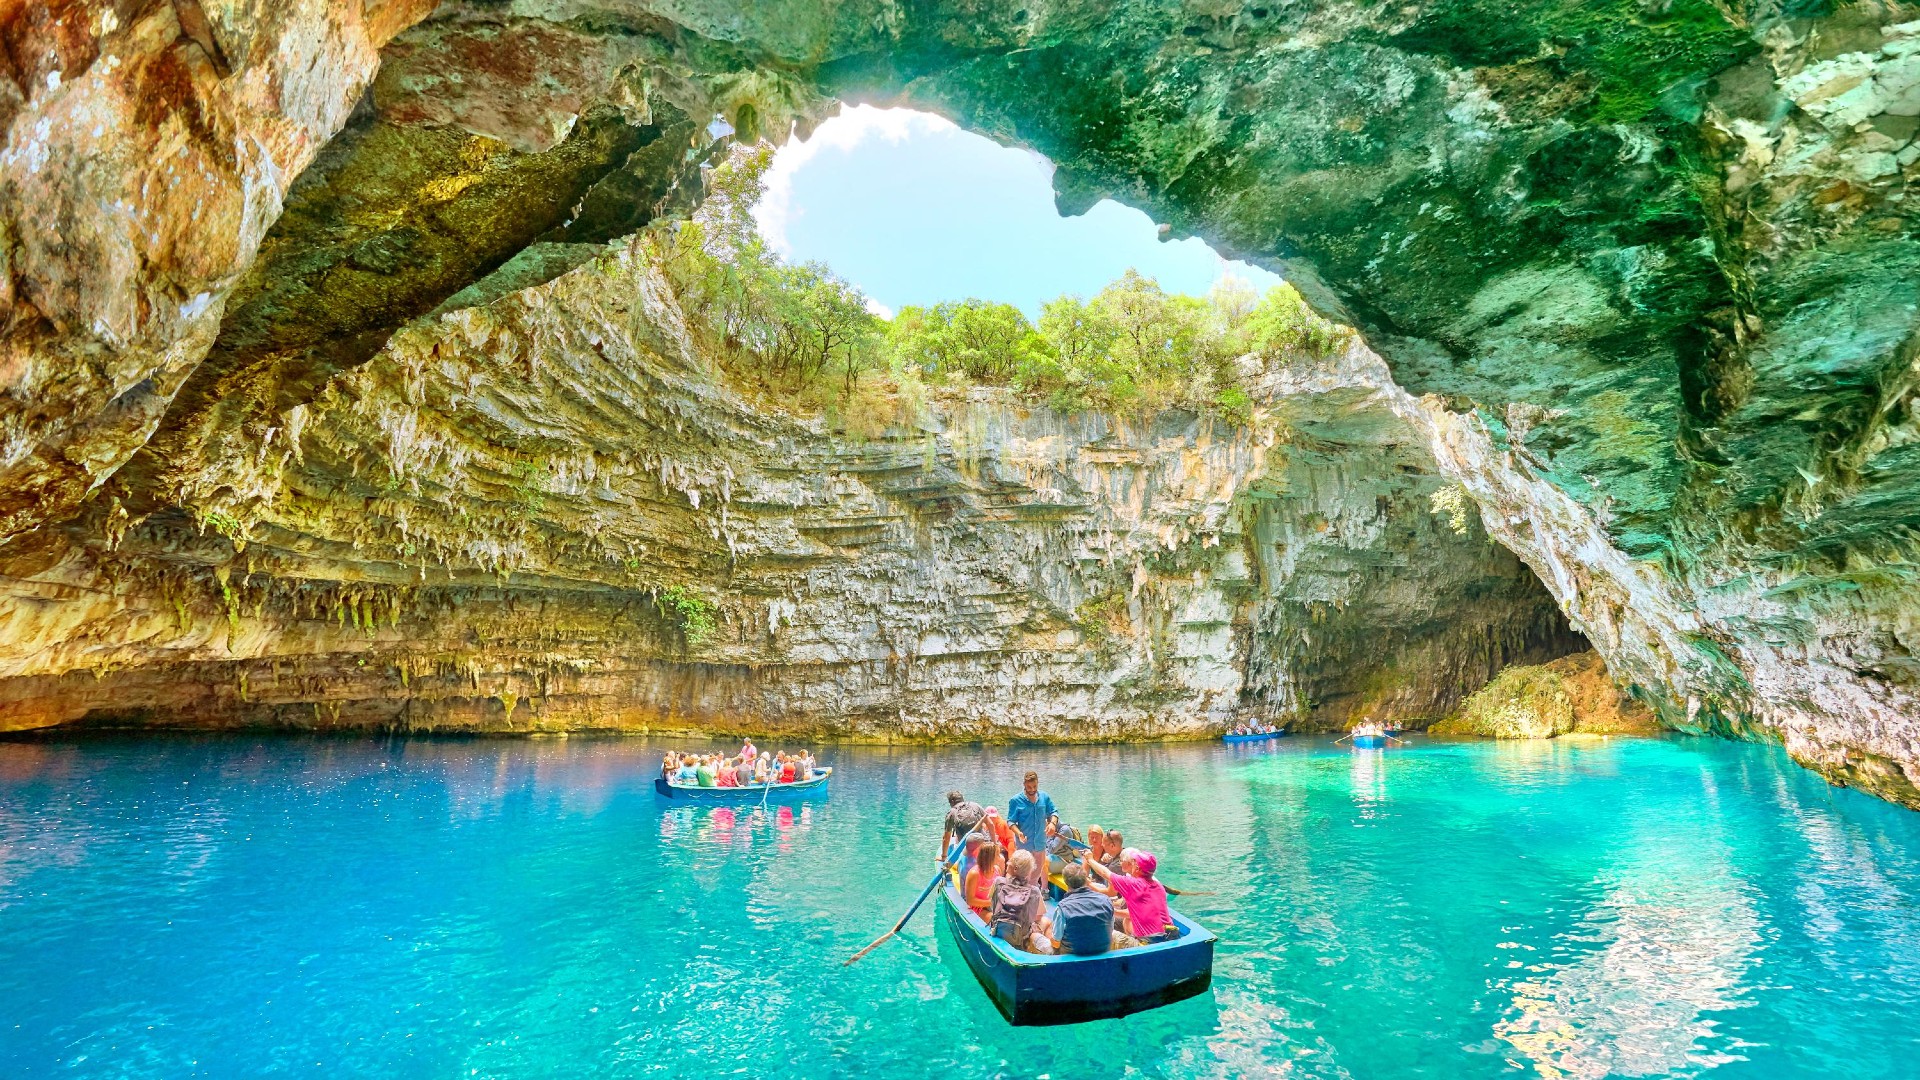 Melissani Lake | The Cave Of The Nymphs